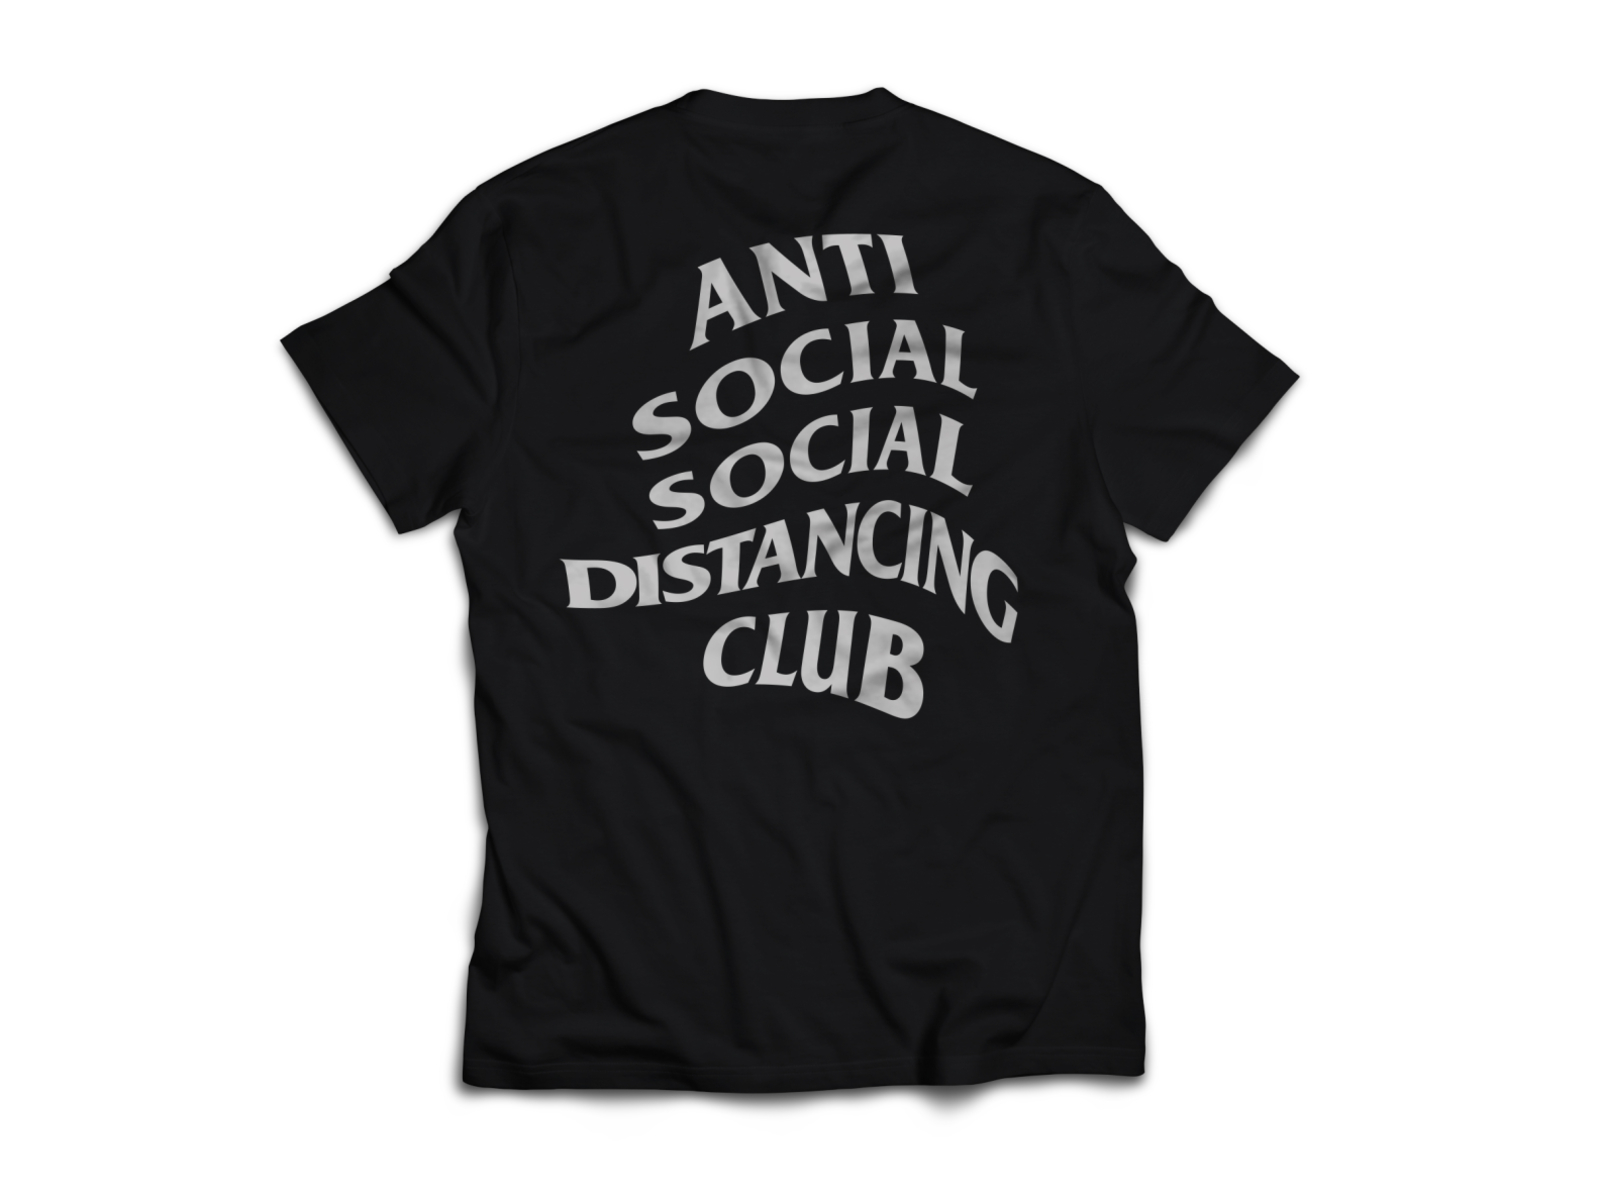 ZYX Women Im Not Antisocial Letter Print Tee Casual Short Sleeve Social Distancing Tee T-Shirt